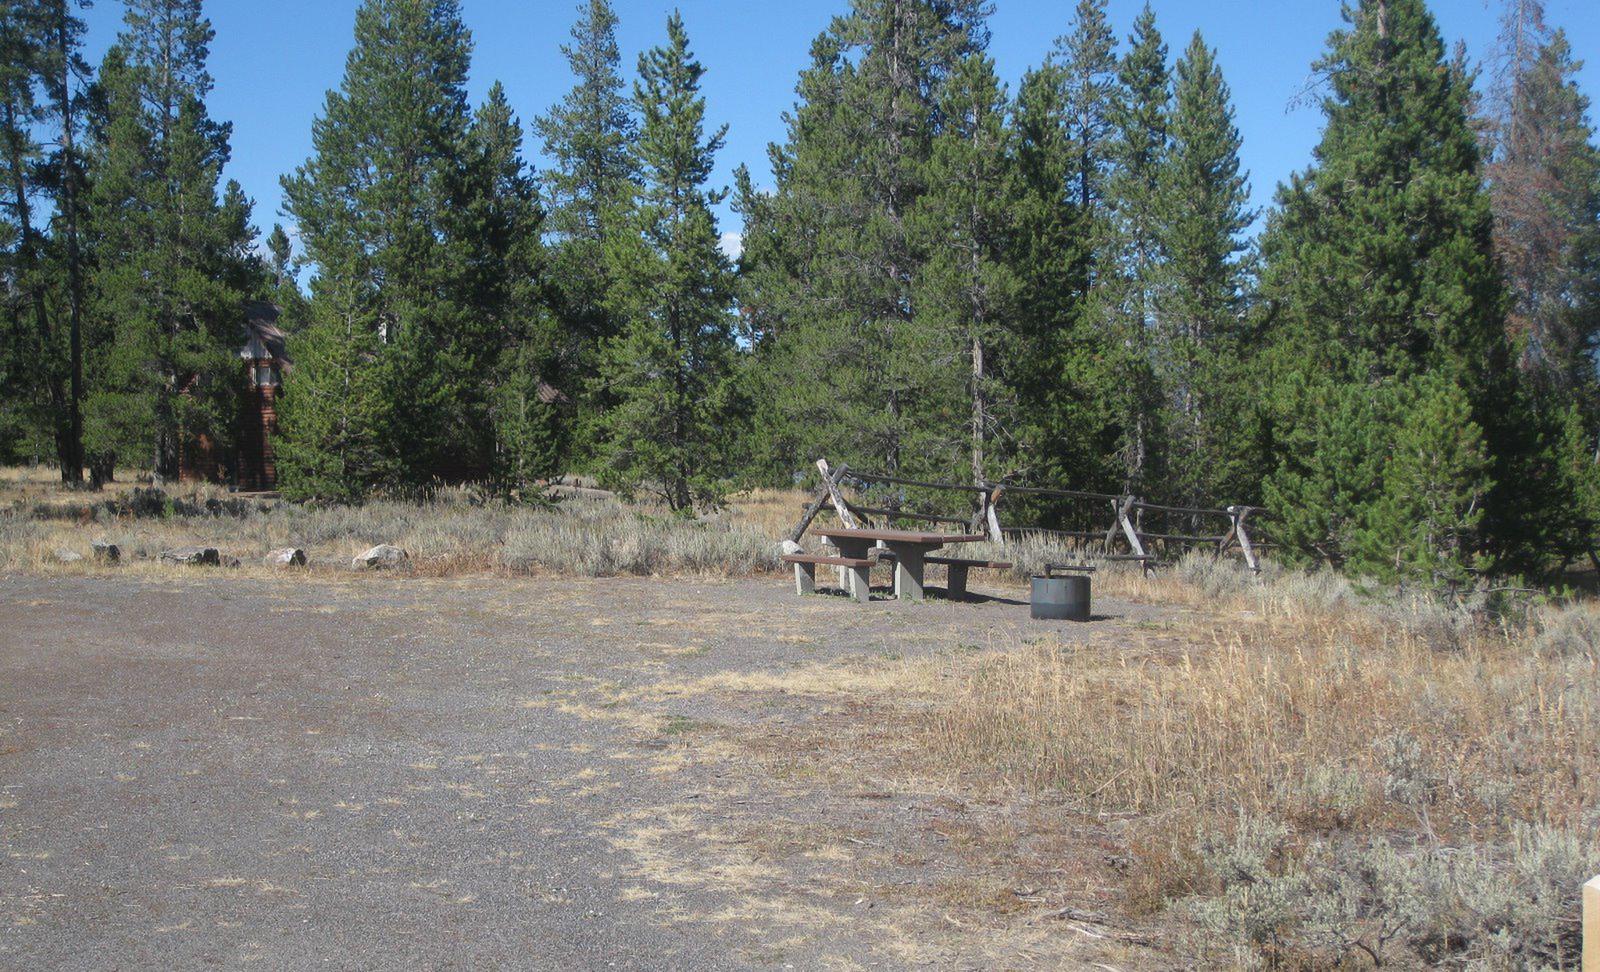 Site 27, campsite surrounded by pine trees, picnic table & fire ringSite 27